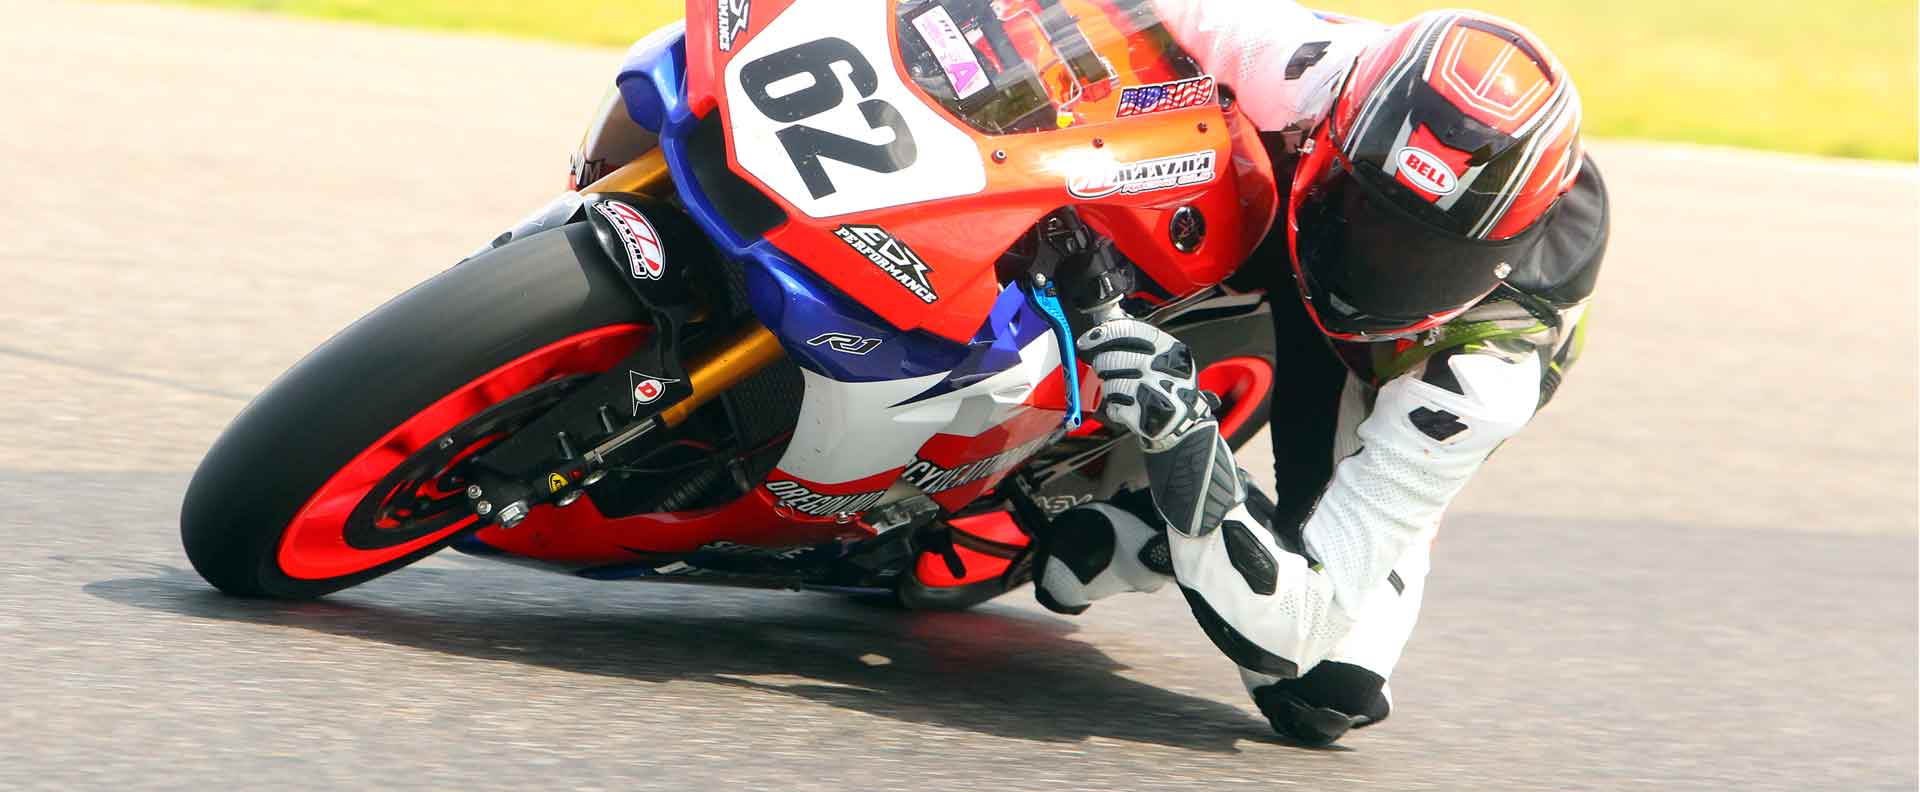 Andy riding his oregon motorcycle attorney backed R1 at Thunderhill Speedway in April